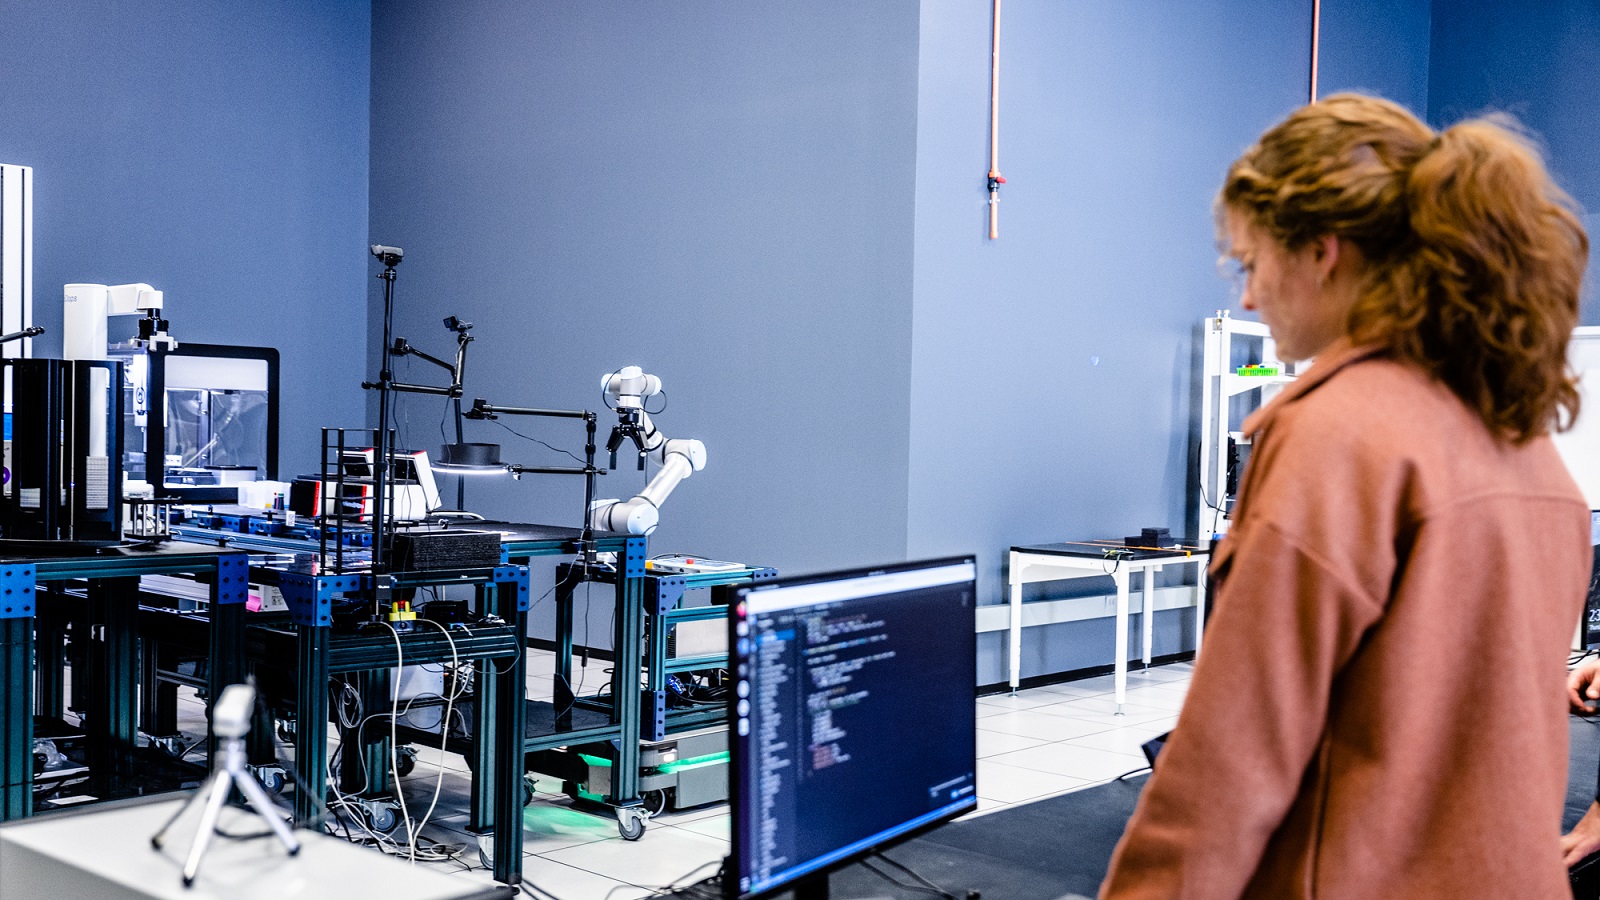 The Rapid Prototyping Lab is a proving ground for the robots researchers will use in automated labs. Casey Stone is one of the researchers figuring out how to incorporate new technology into biology and chemistry experiments.